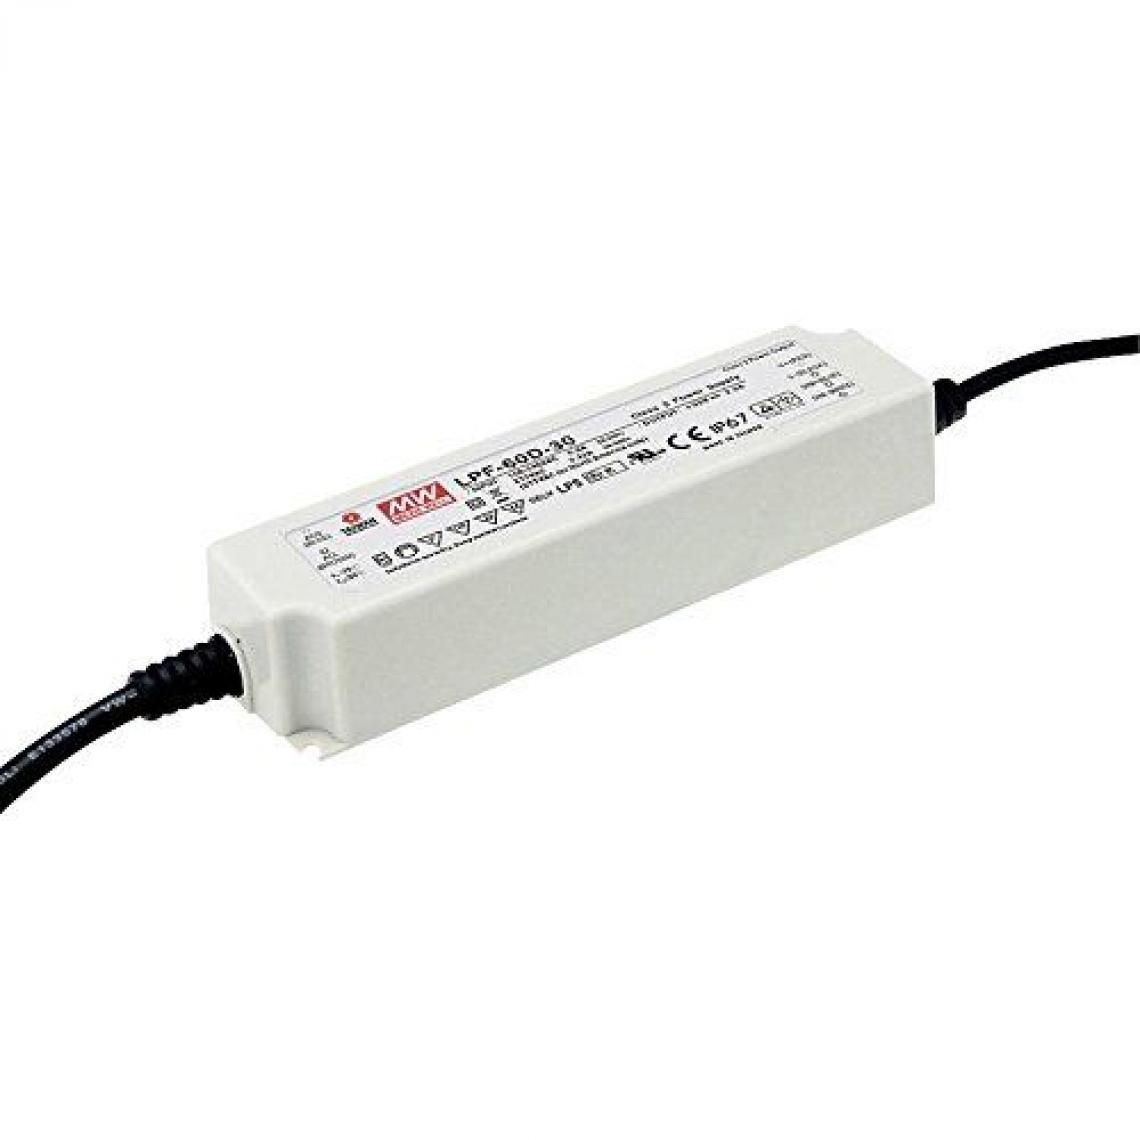 Inconnu - Driver LED Mean Well LPF-60D-24 40 W 24 V DC 2,5 A Tension fixe/courant constant - Convertisseurs